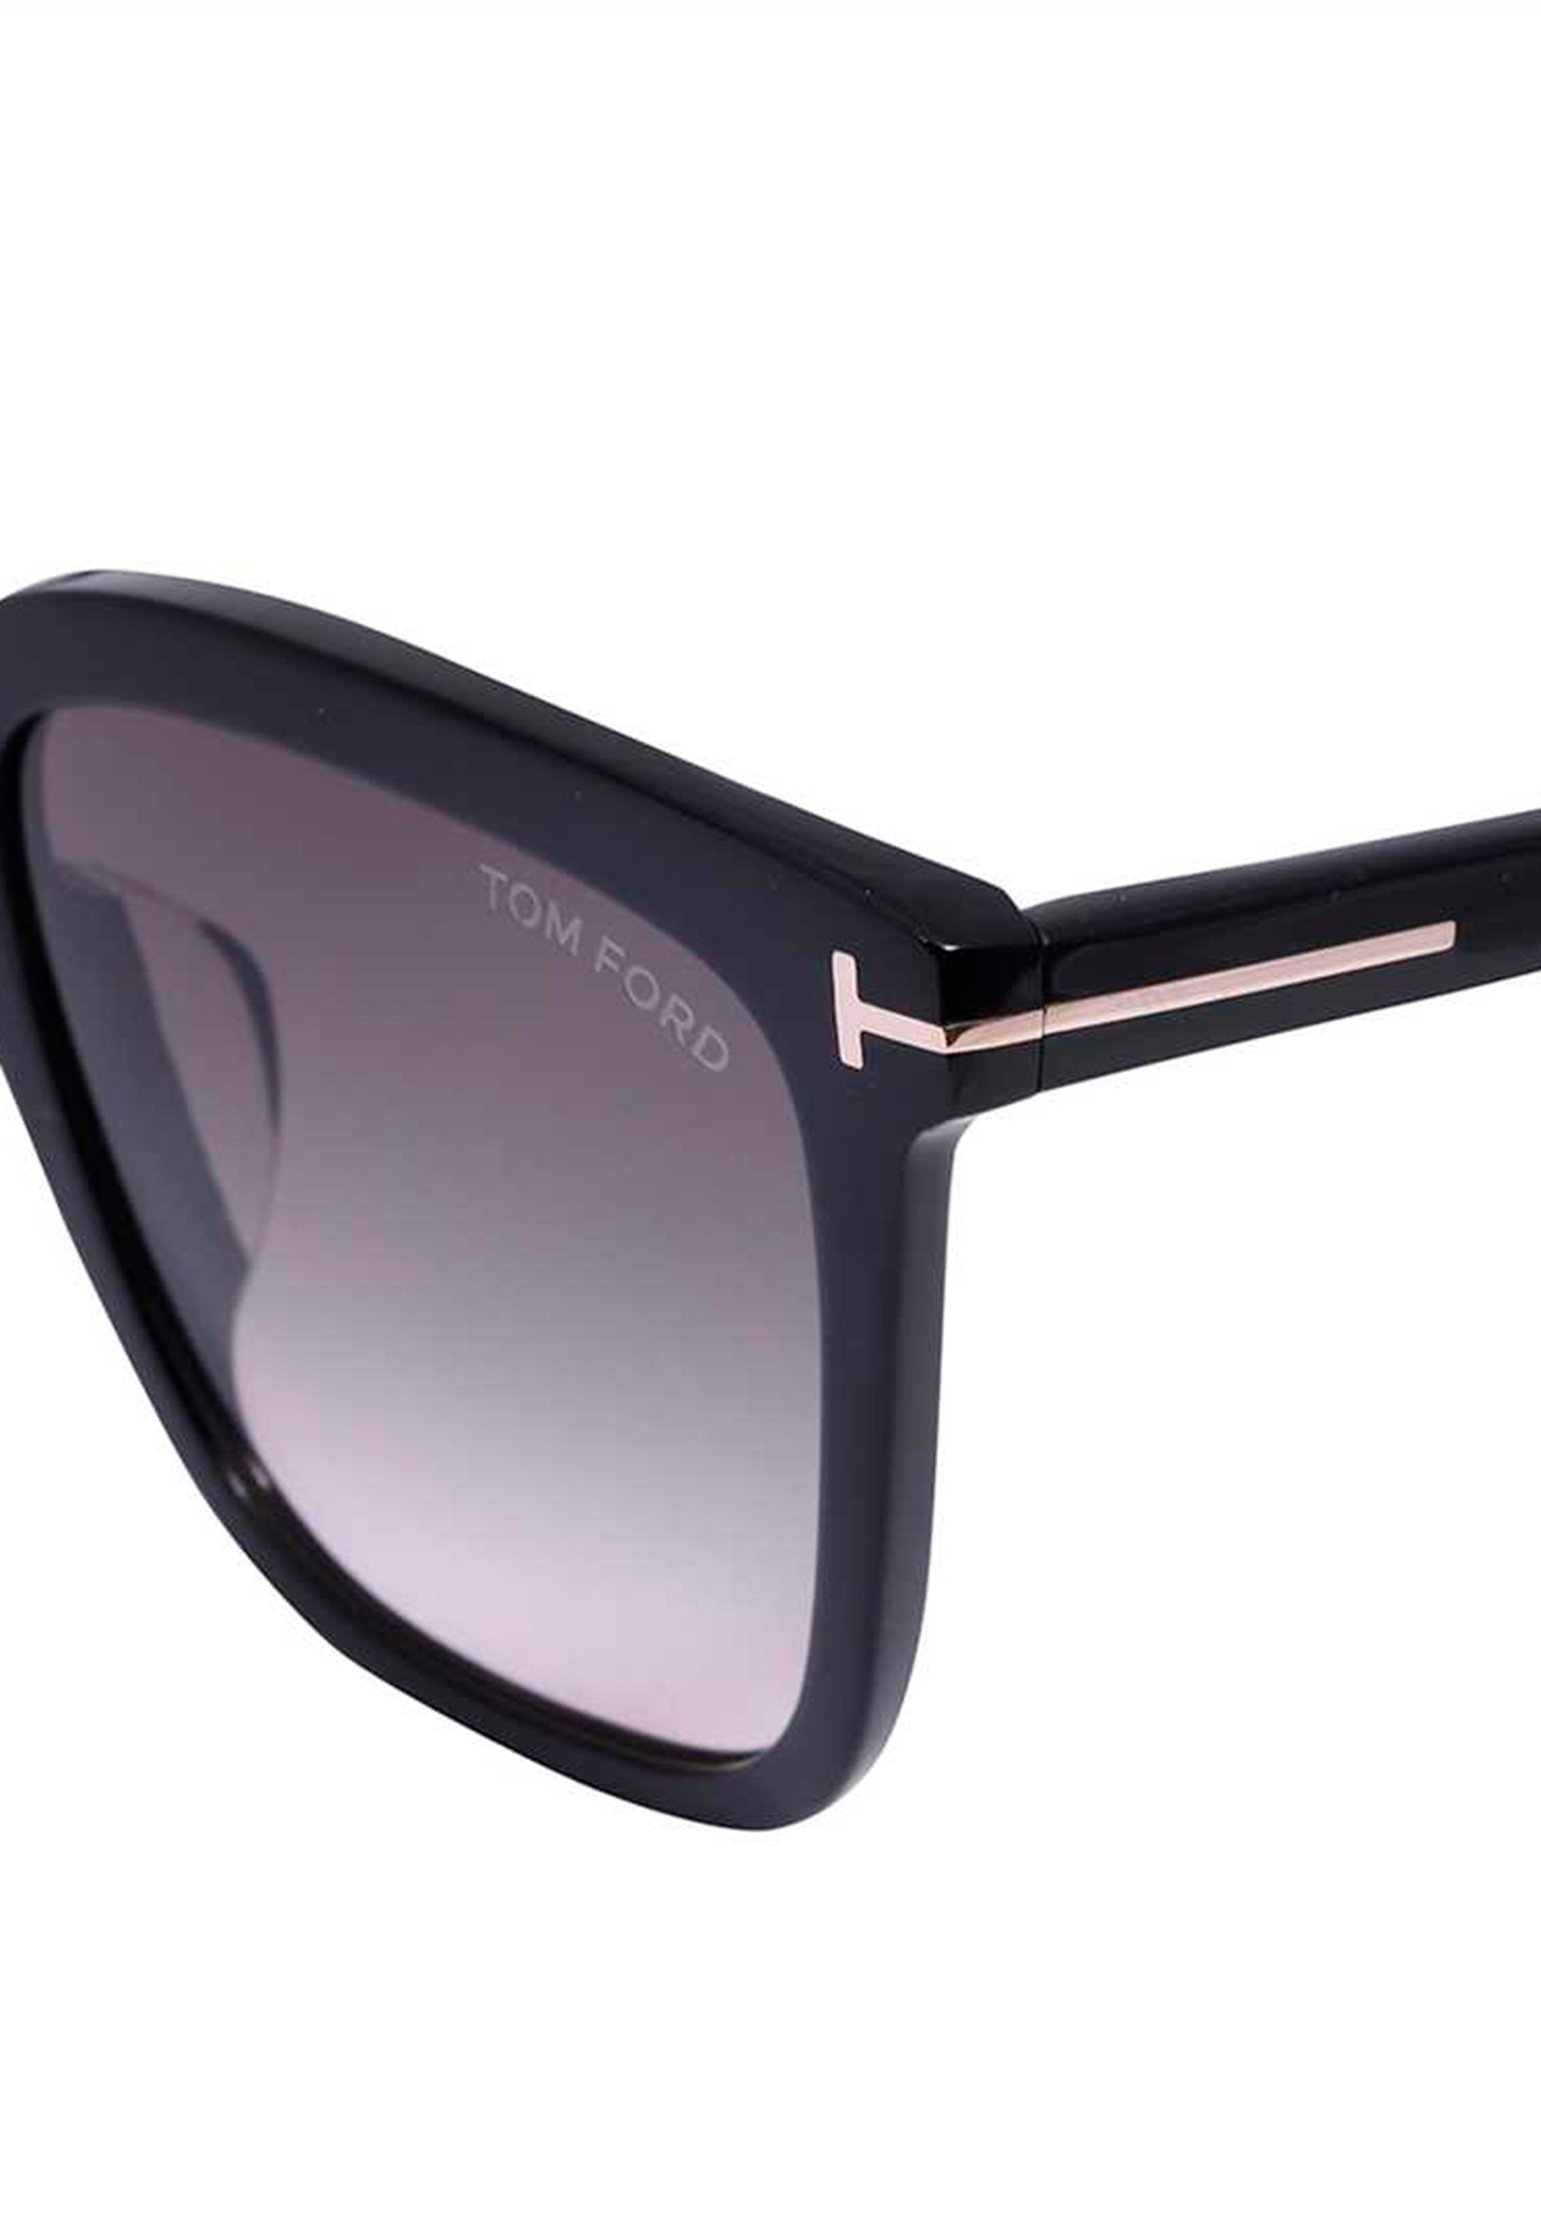 Sunglass TOM FORD Color: black (Code: 1657) in online store Allure